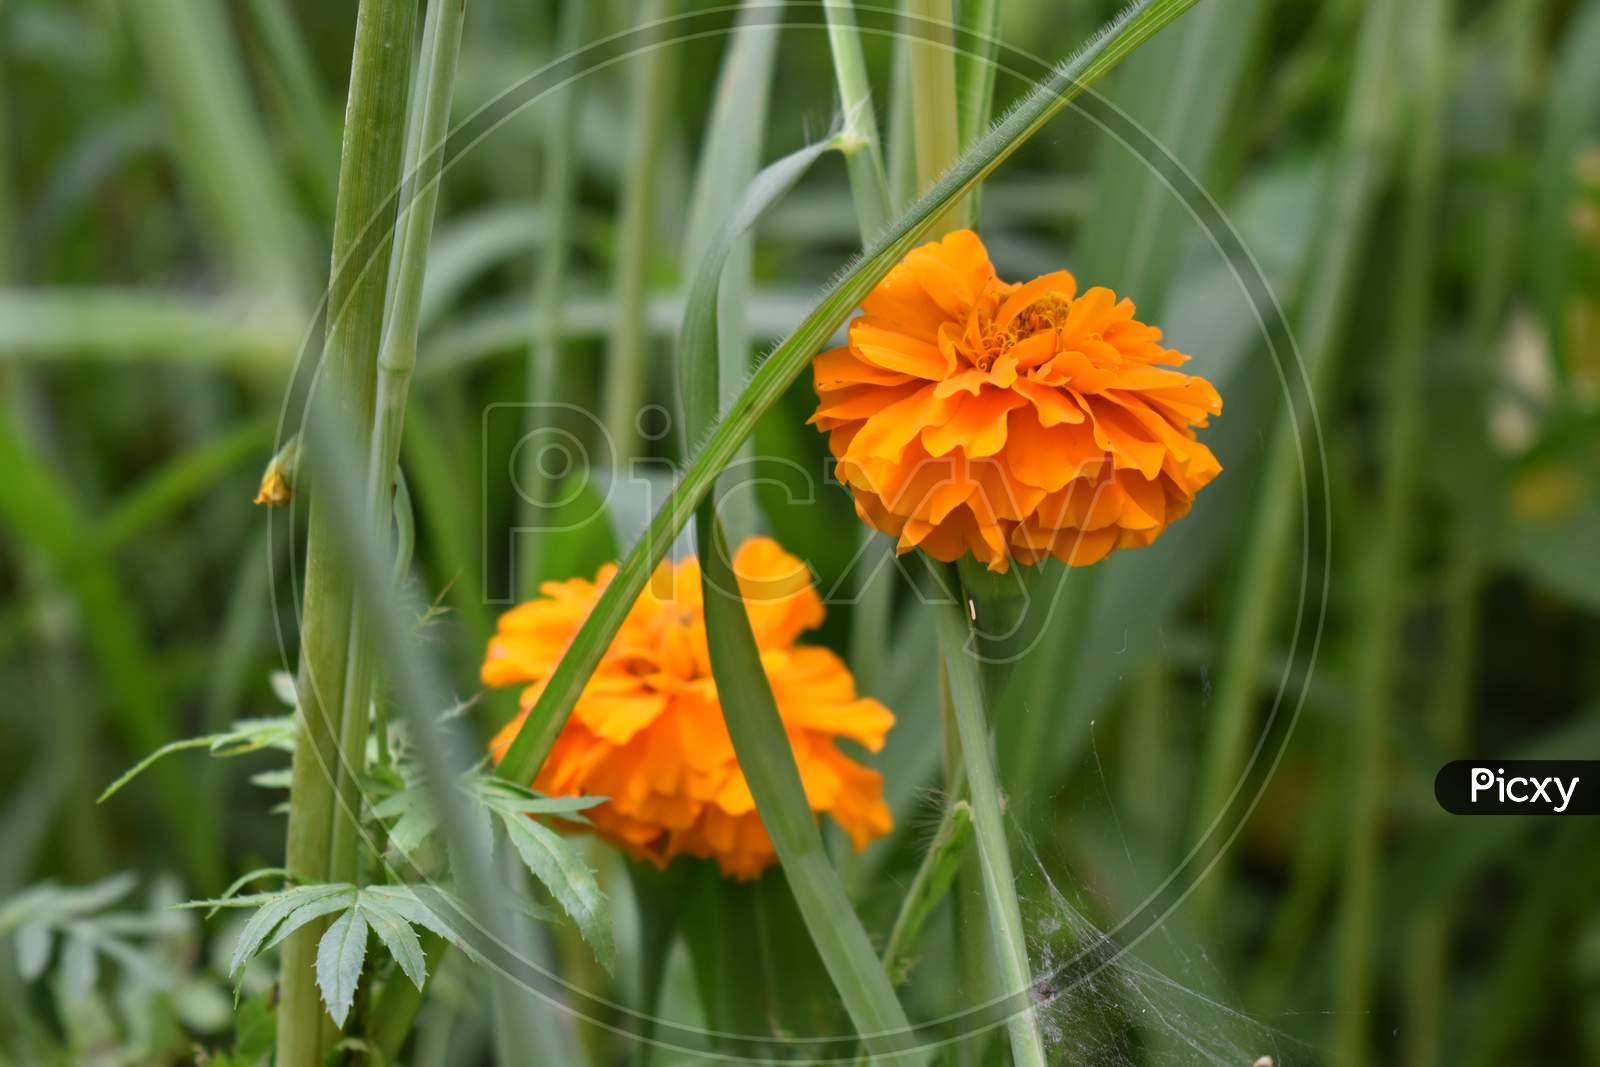 Orange Marigold flower surrounded by grass